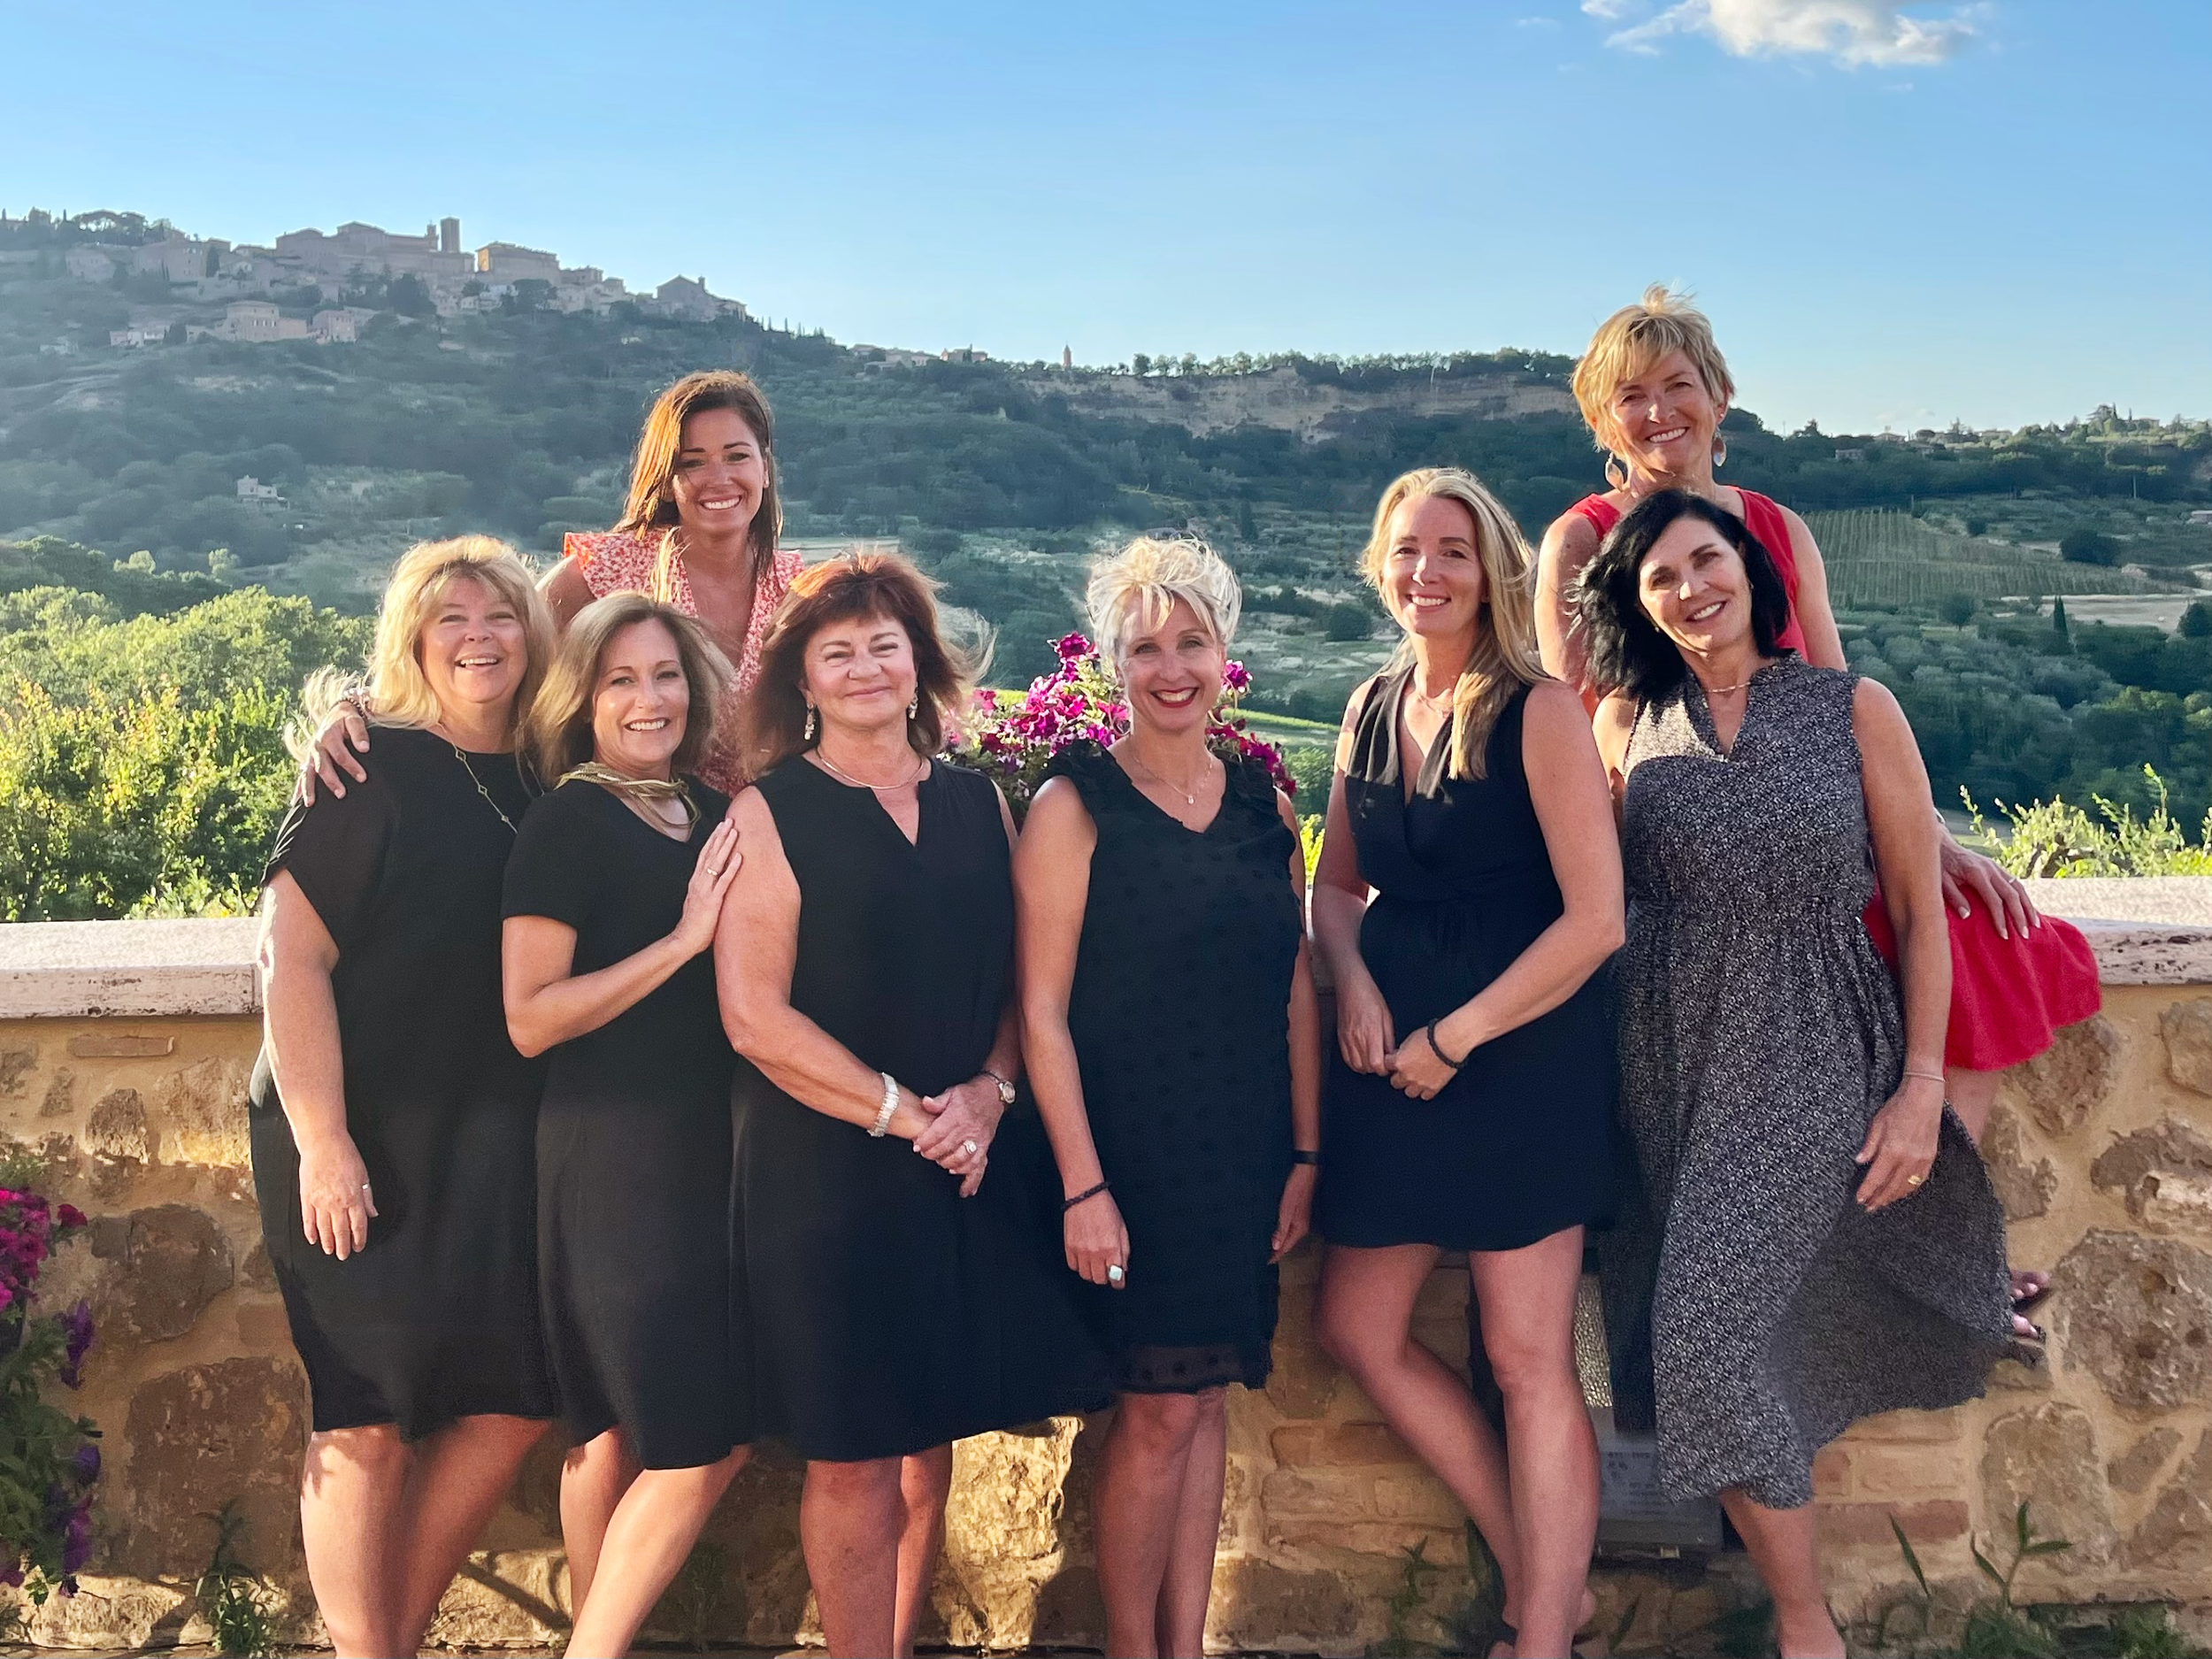 Lisa G. and her friends in Tuscany